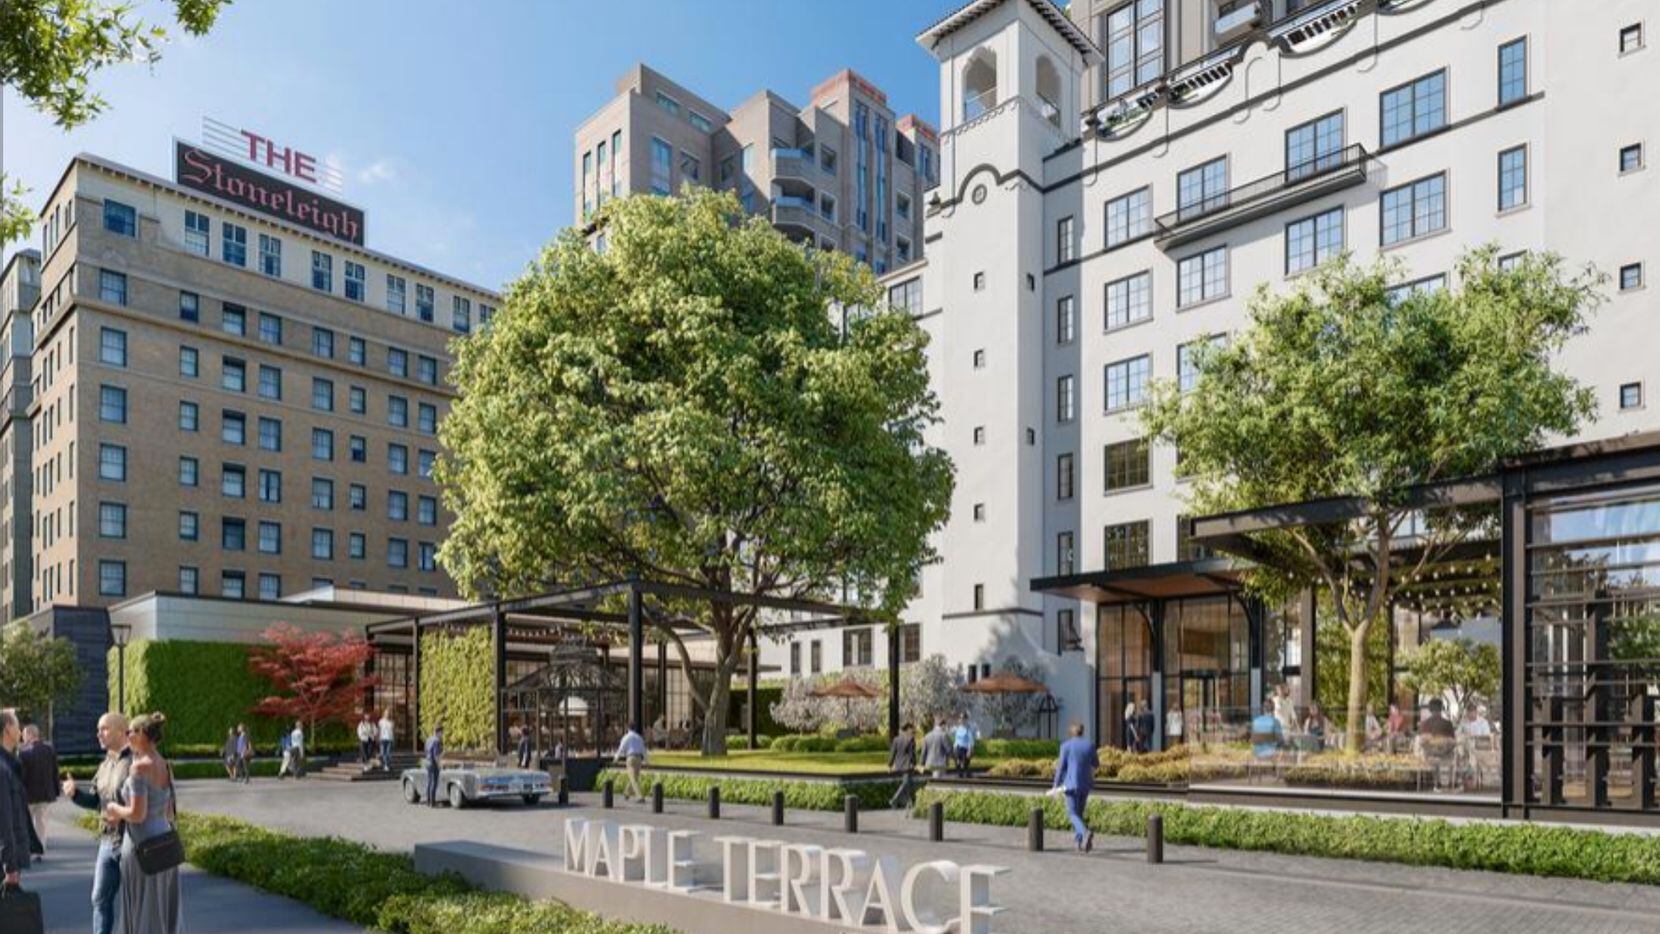 Hines is converting the landmark Maple Terrace apartment building into luxury office space.